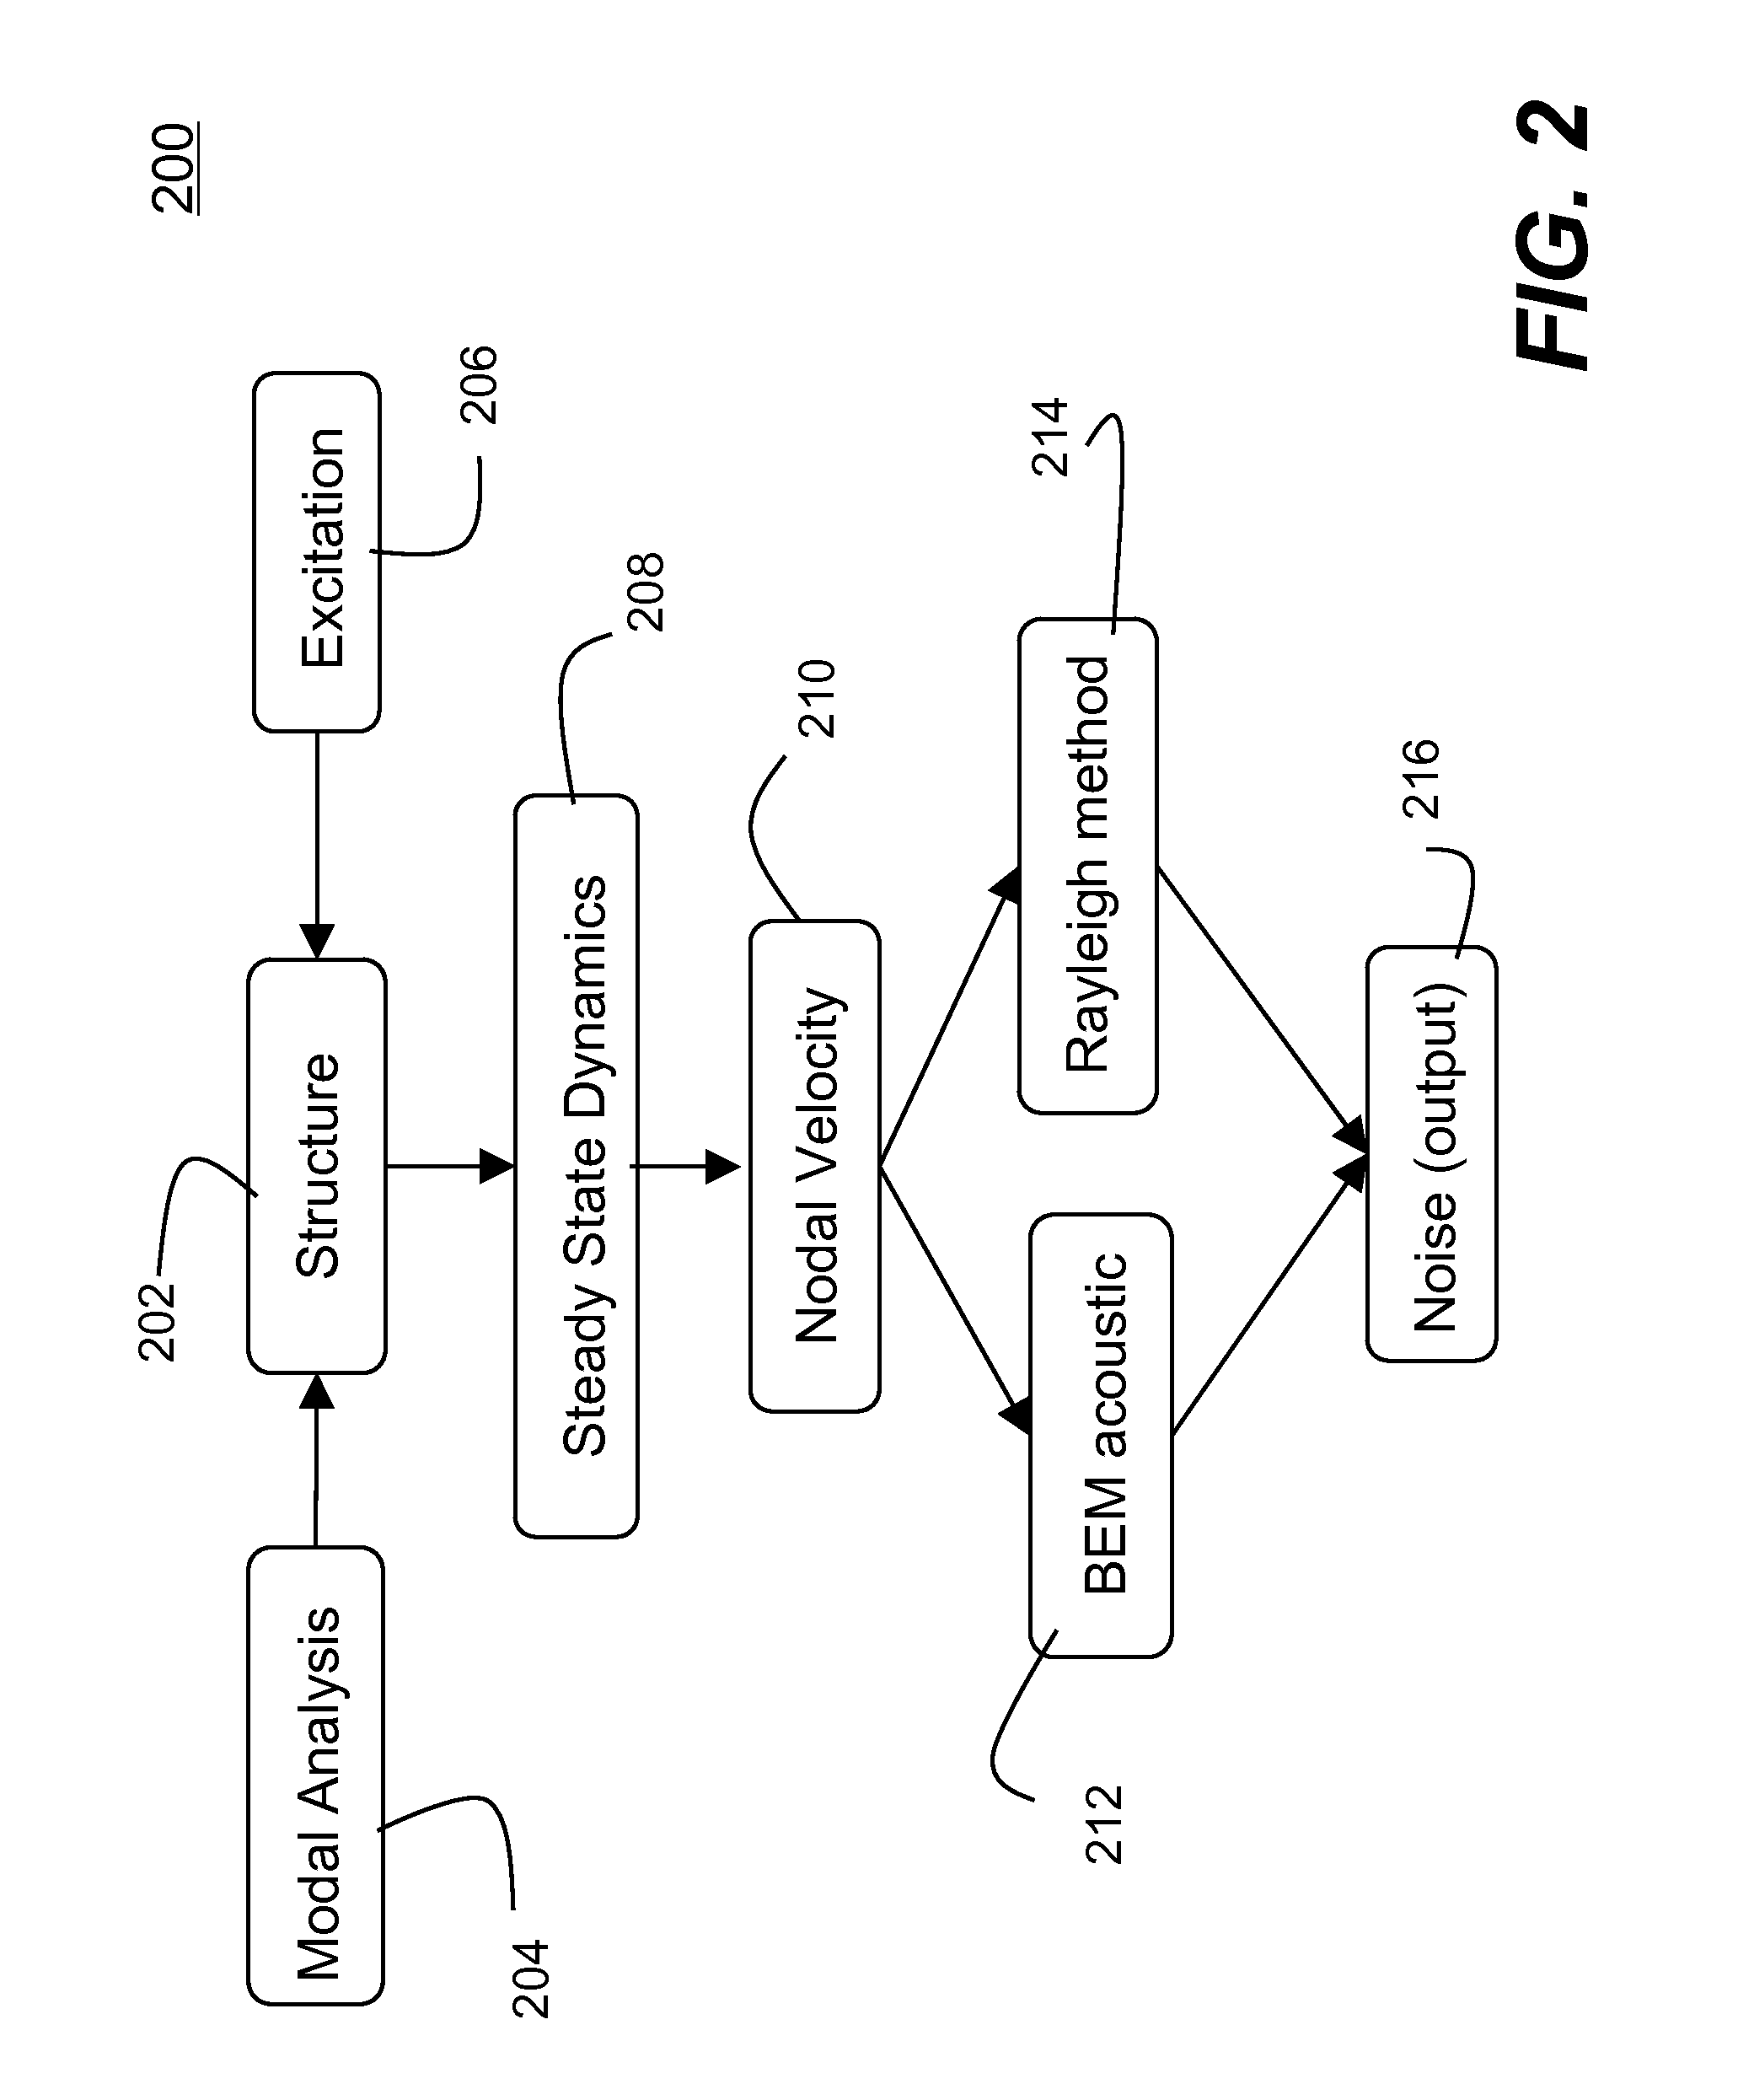 Systems and Methods Of Performing Vibro-acoustic Analysis Of A Structure